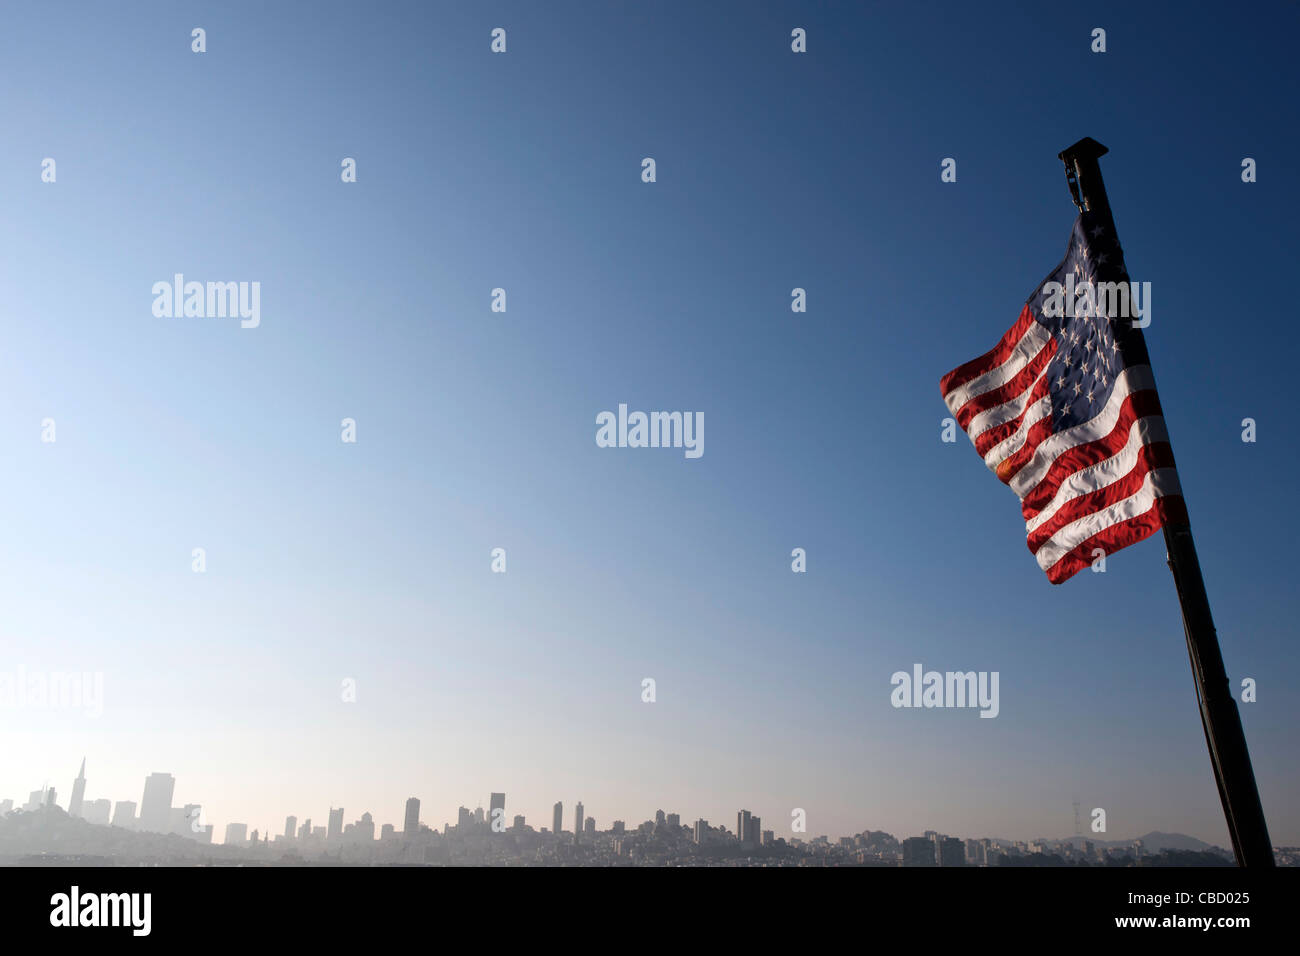 View of an American flag with San Francisco city skyline in the background, California, United States of America Stock Photo